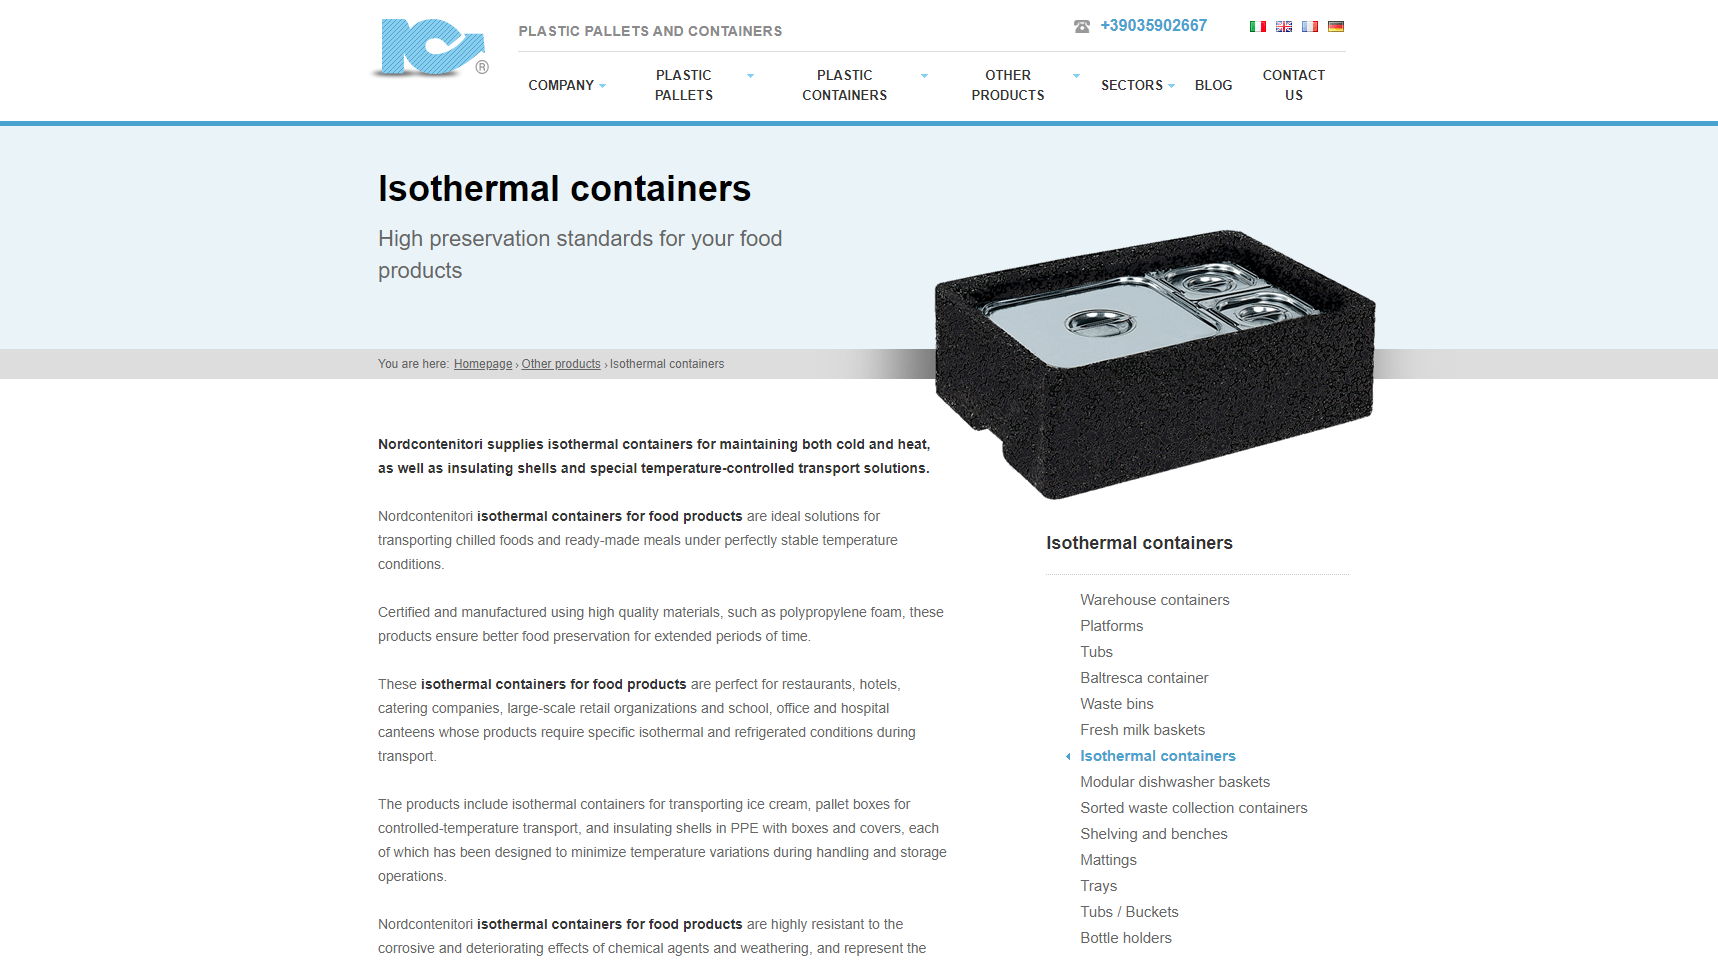 Nordcontenitori - Isothermal Catering Packaging Manufacturer